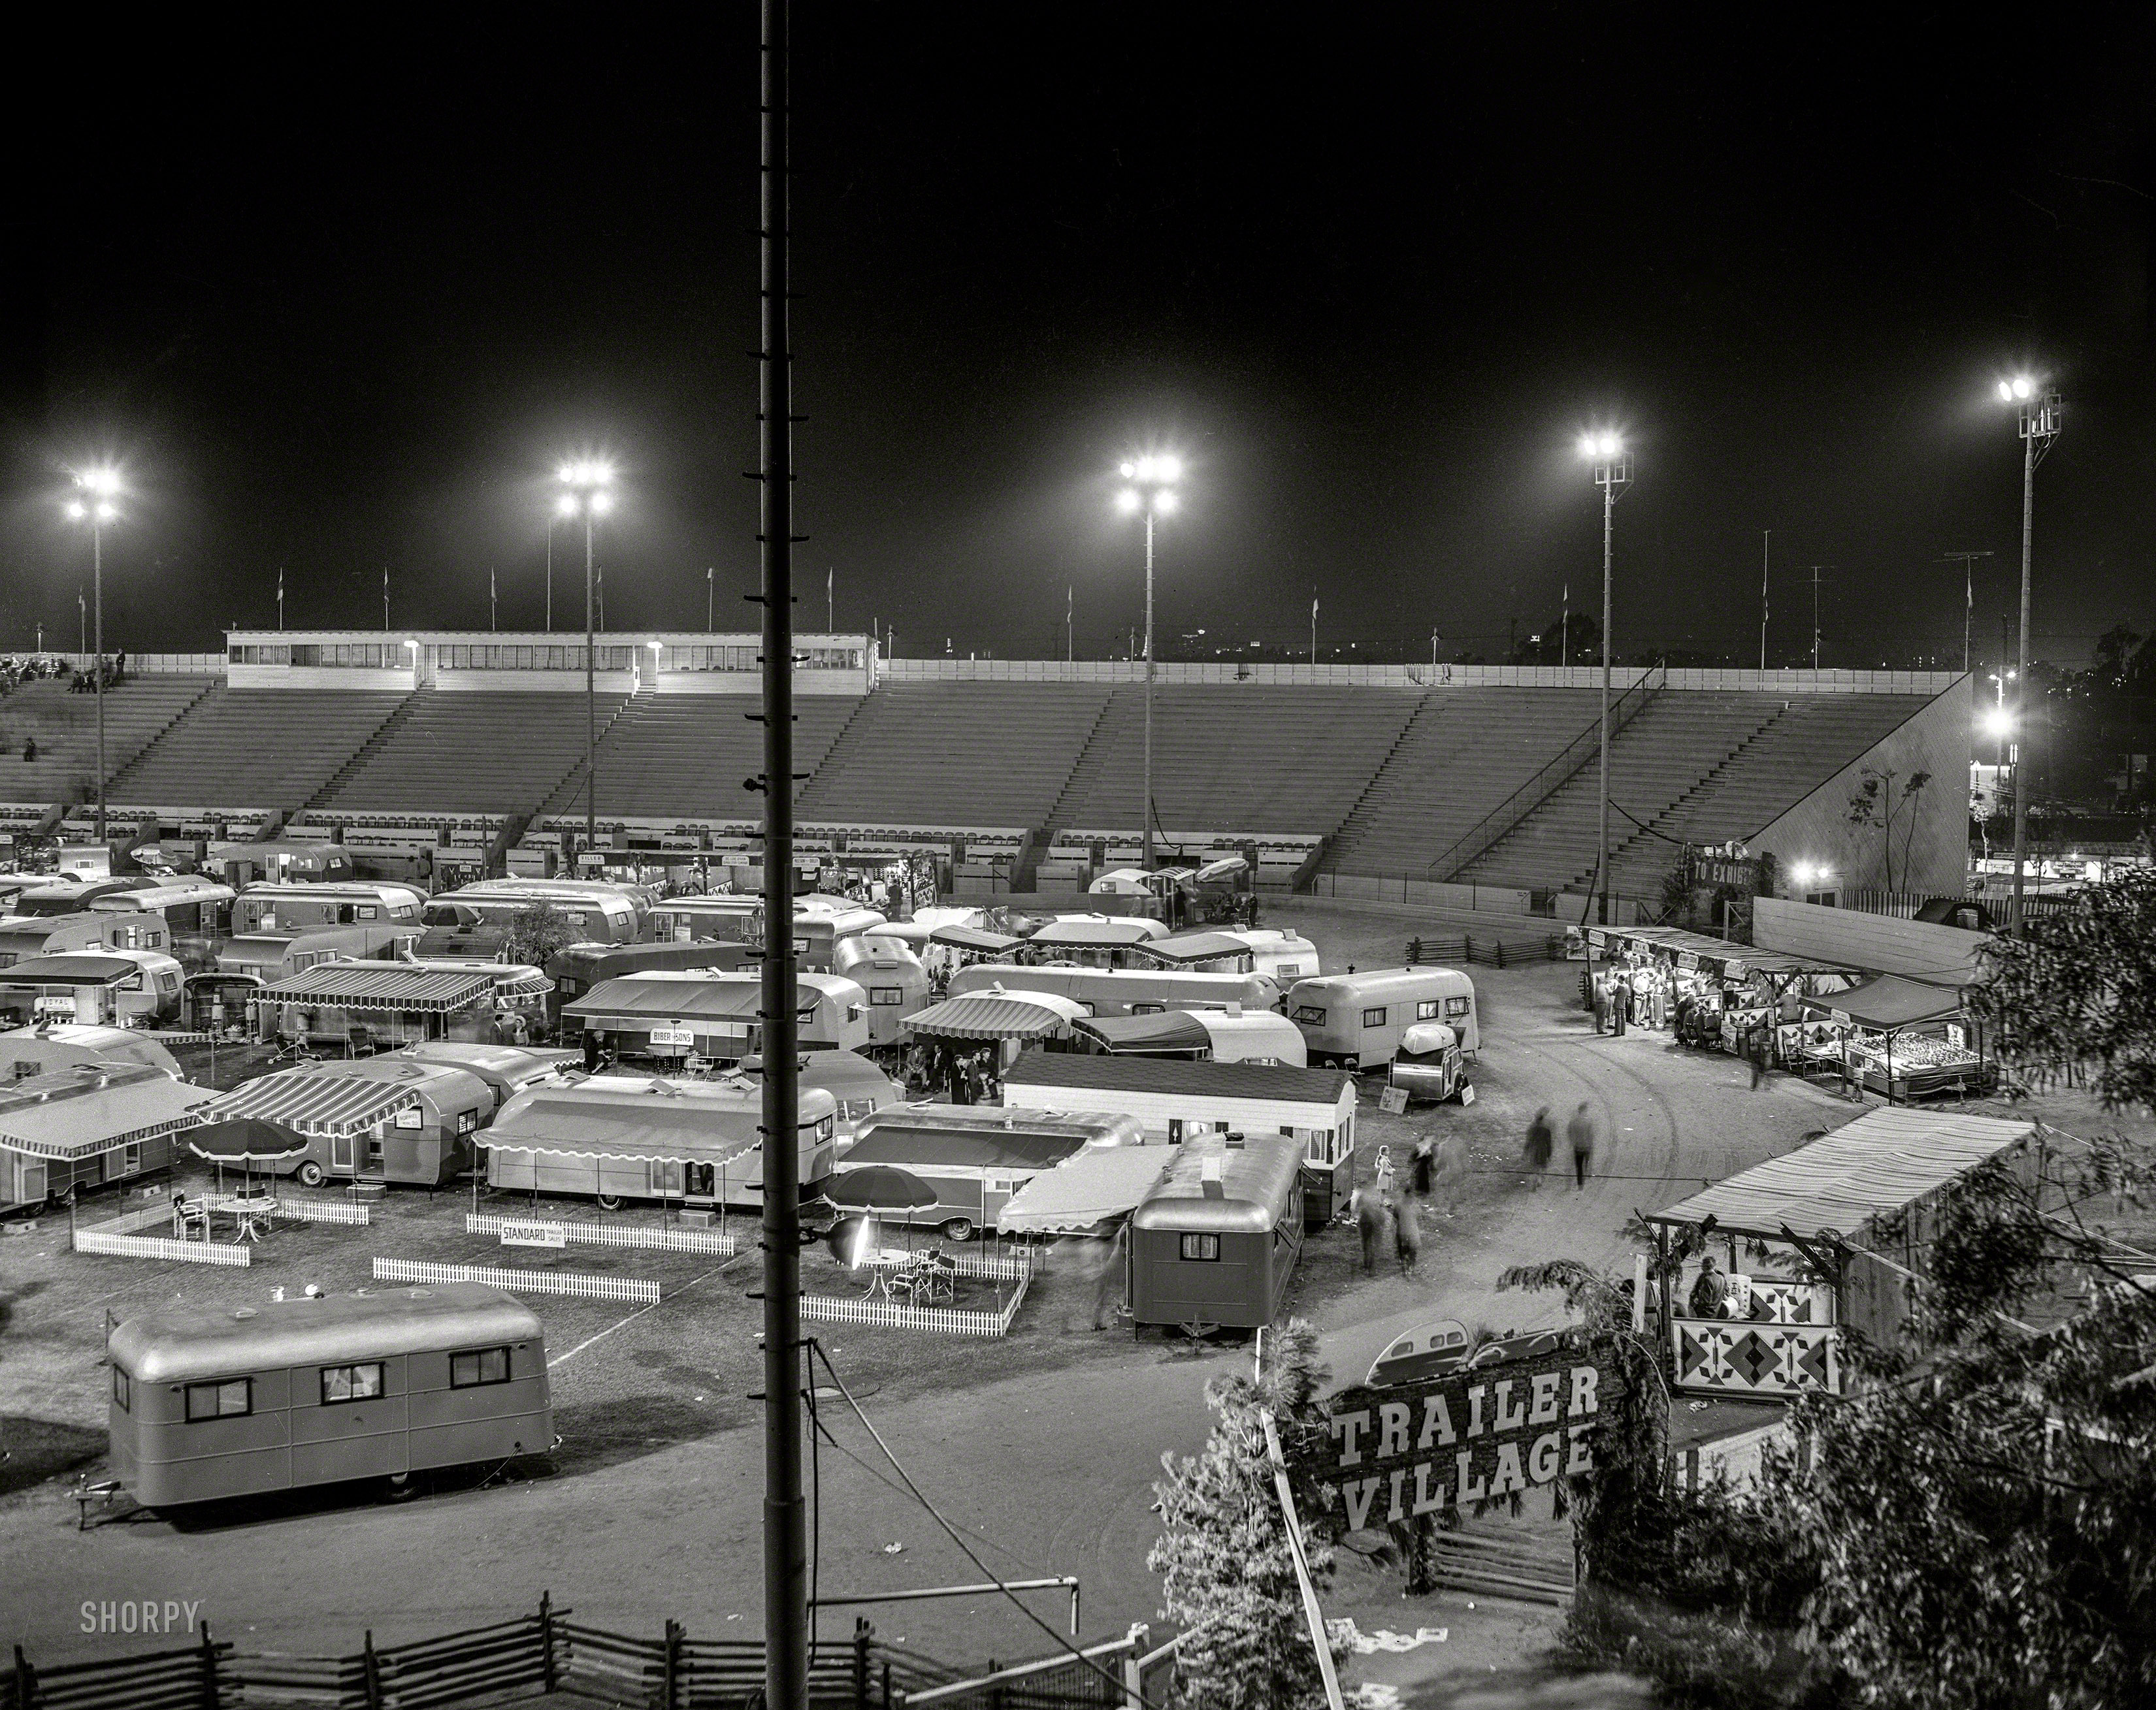 "1947 trailer show at Gilmore Field, Los Angeles." The Gypsy life, mid-century style. 4x5 negative by Watson from the News Photo Archive. View full size.